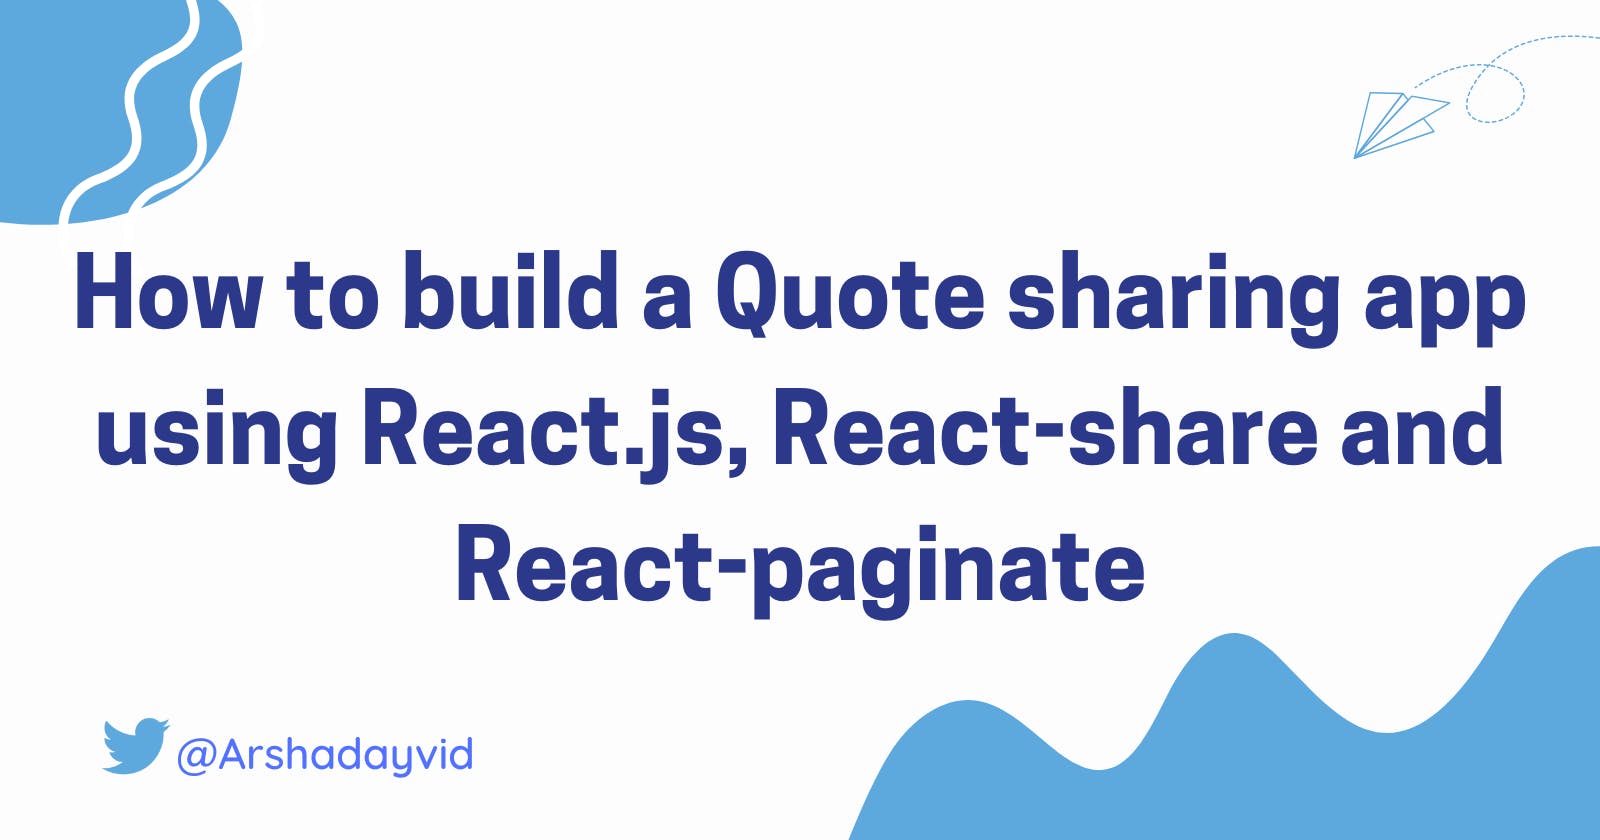 How to build a Quote sharing app using React.js, React-share and React-paginate